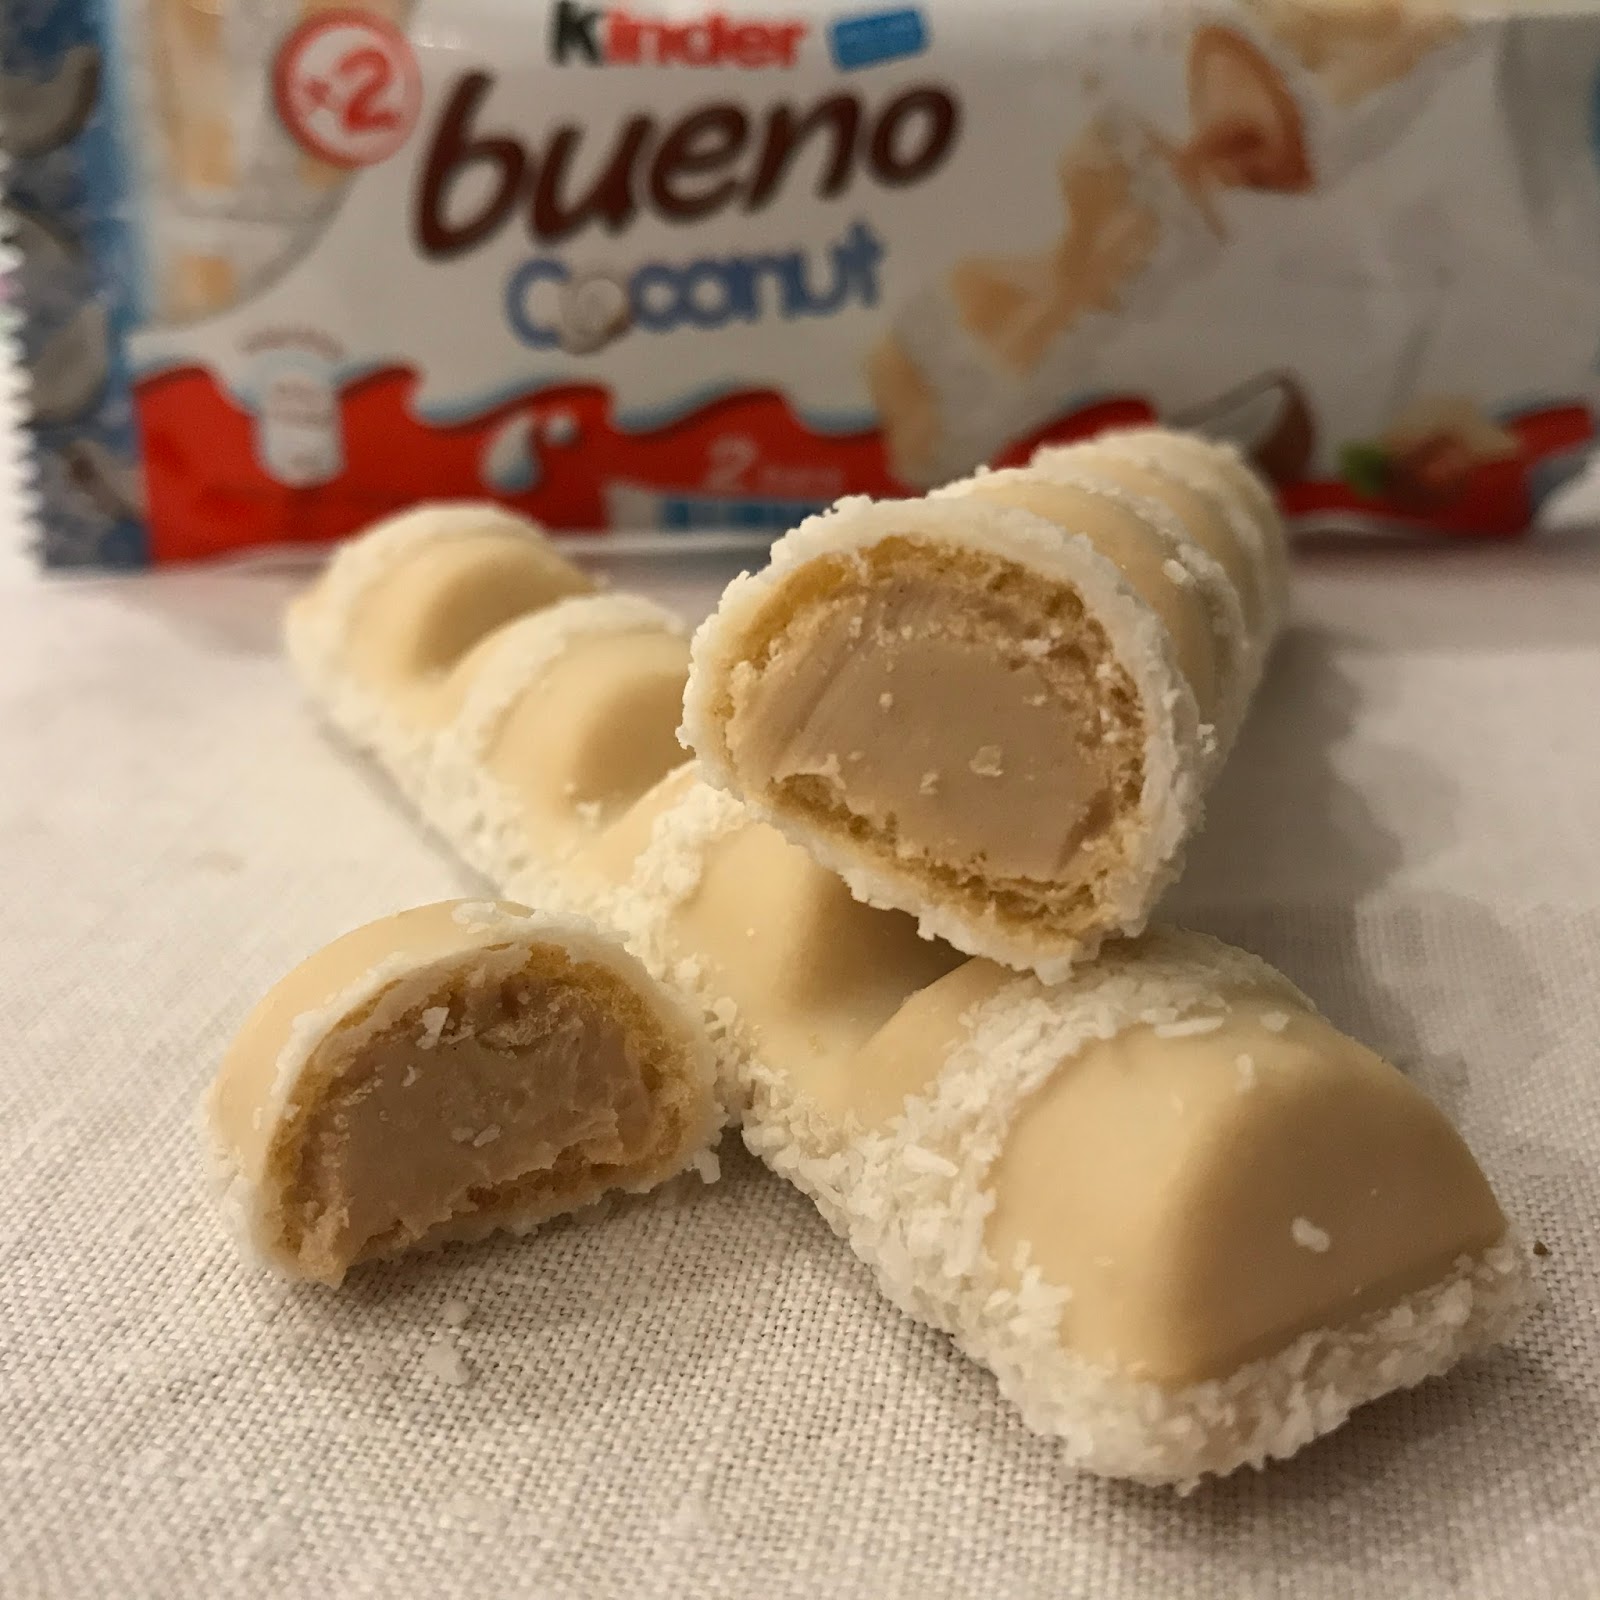 Archived Reviews From Amy Seeks New Treats: NEW! Kinder Bueno Coconut  (Superdrug)